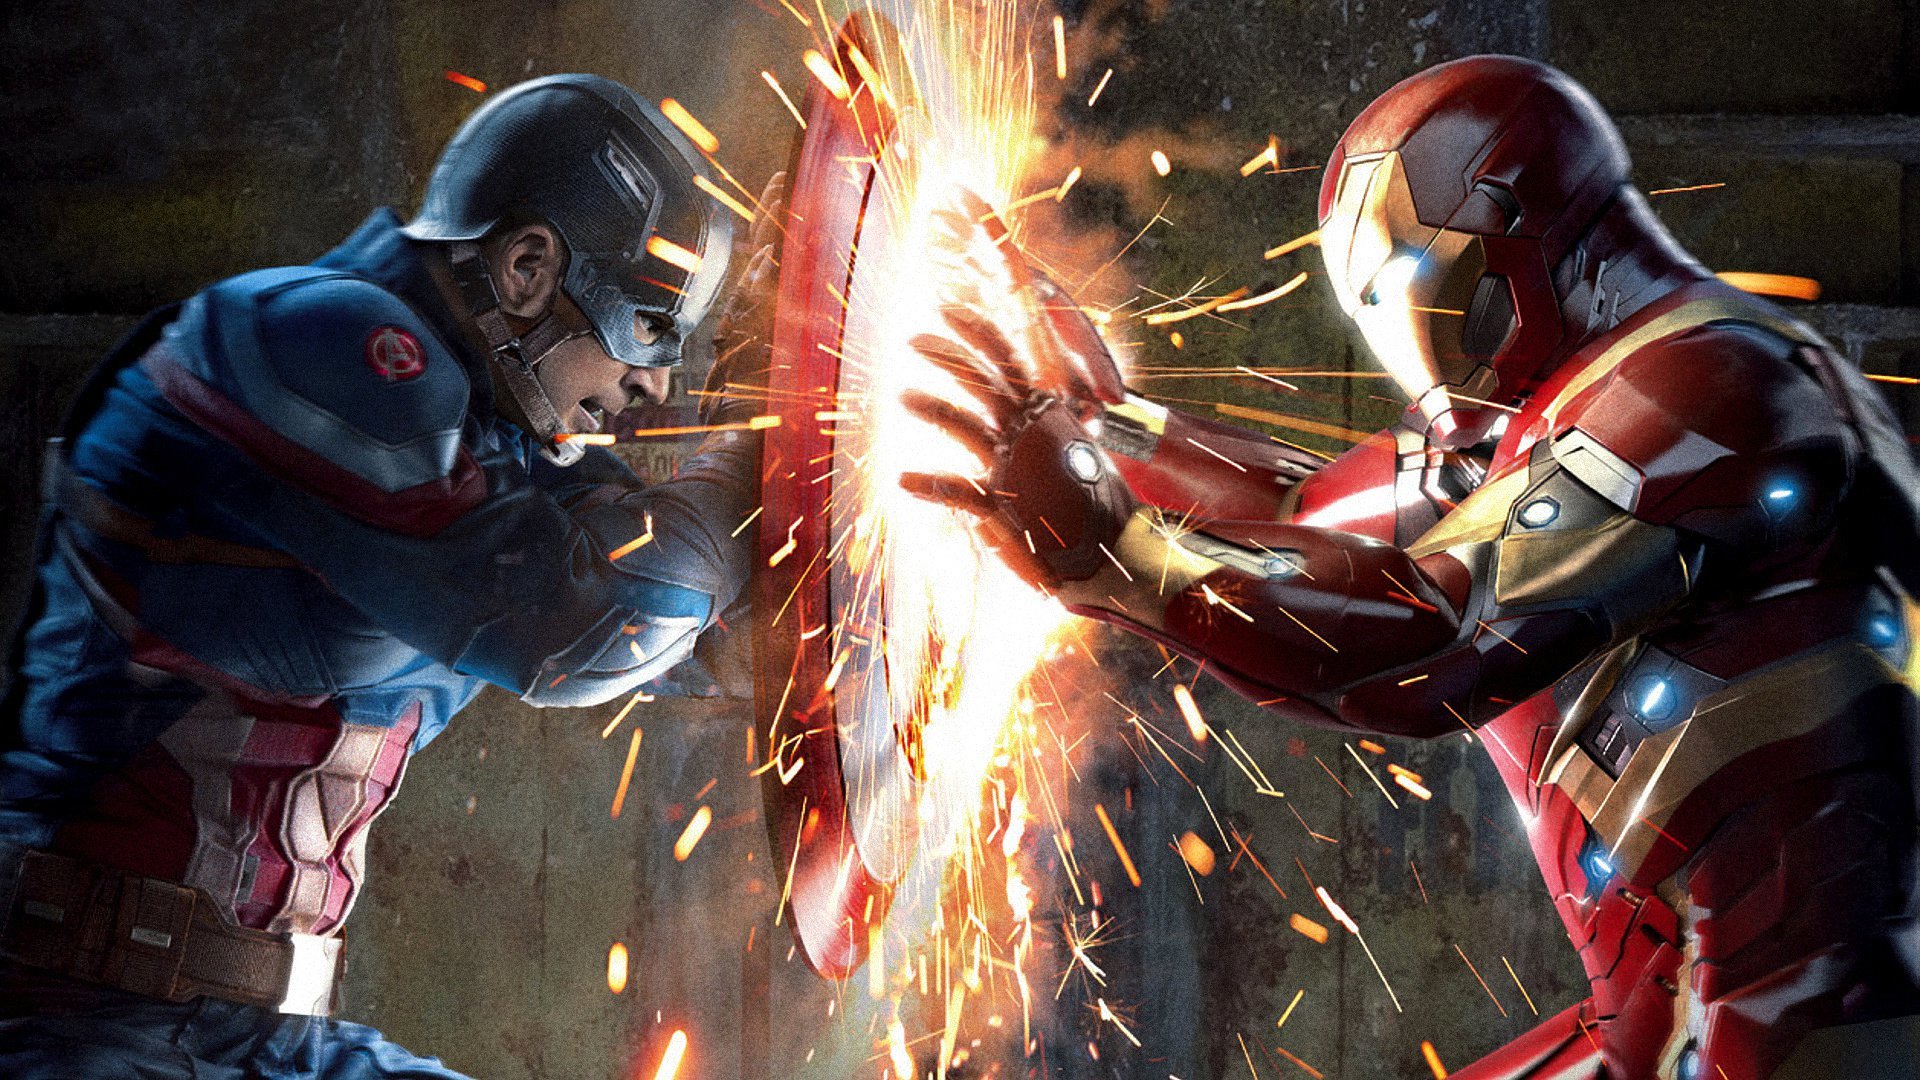 Captain America And Iron Man Fight - HD Wallpaper 